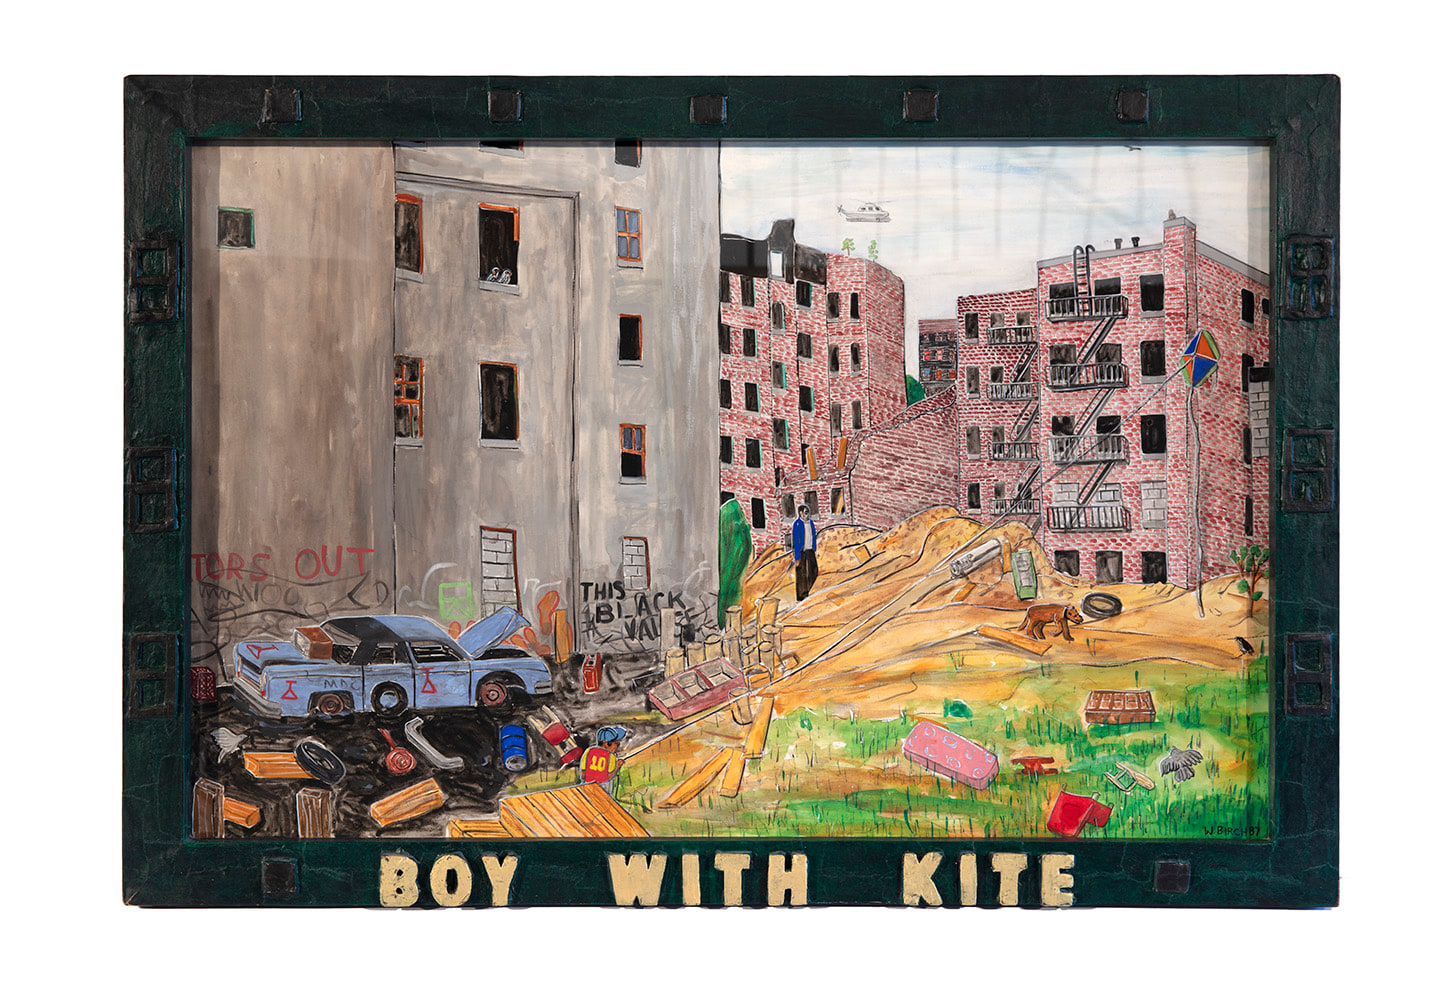 Boy with Kite, 1987
Pencil graphite and gouache on paper with acrylic painted papier-m&amp;acirc;ch&amp;eacute; frame
30.25 x 44.25 x 1.5 inches